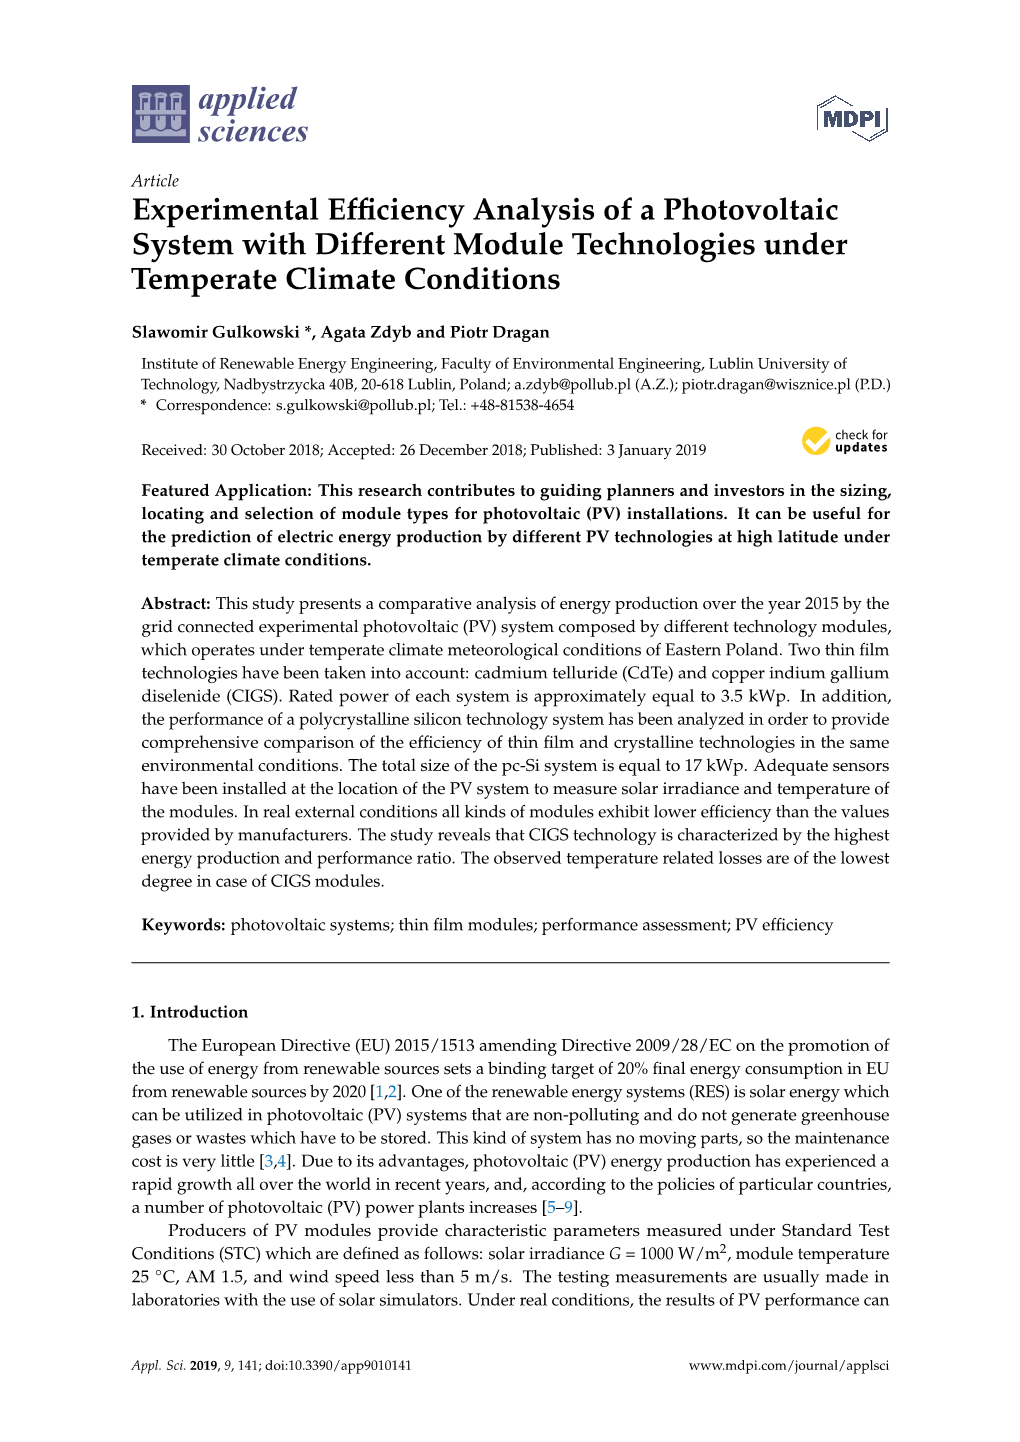 Experimental Efficiency Analysis of a Photovoltaic System with Different